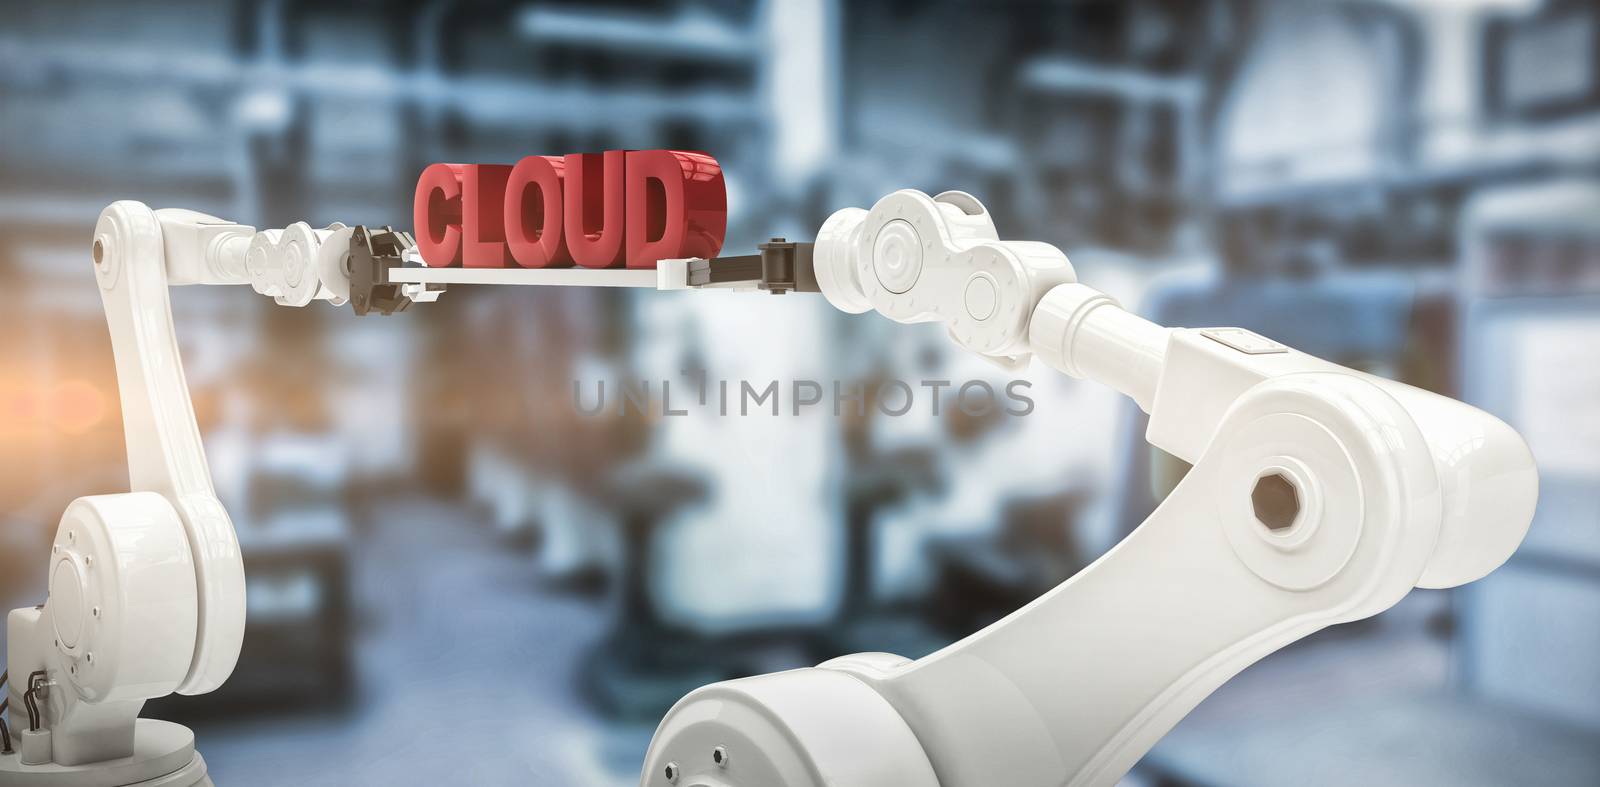 Robotic hands holding red cloud text against white background against factory